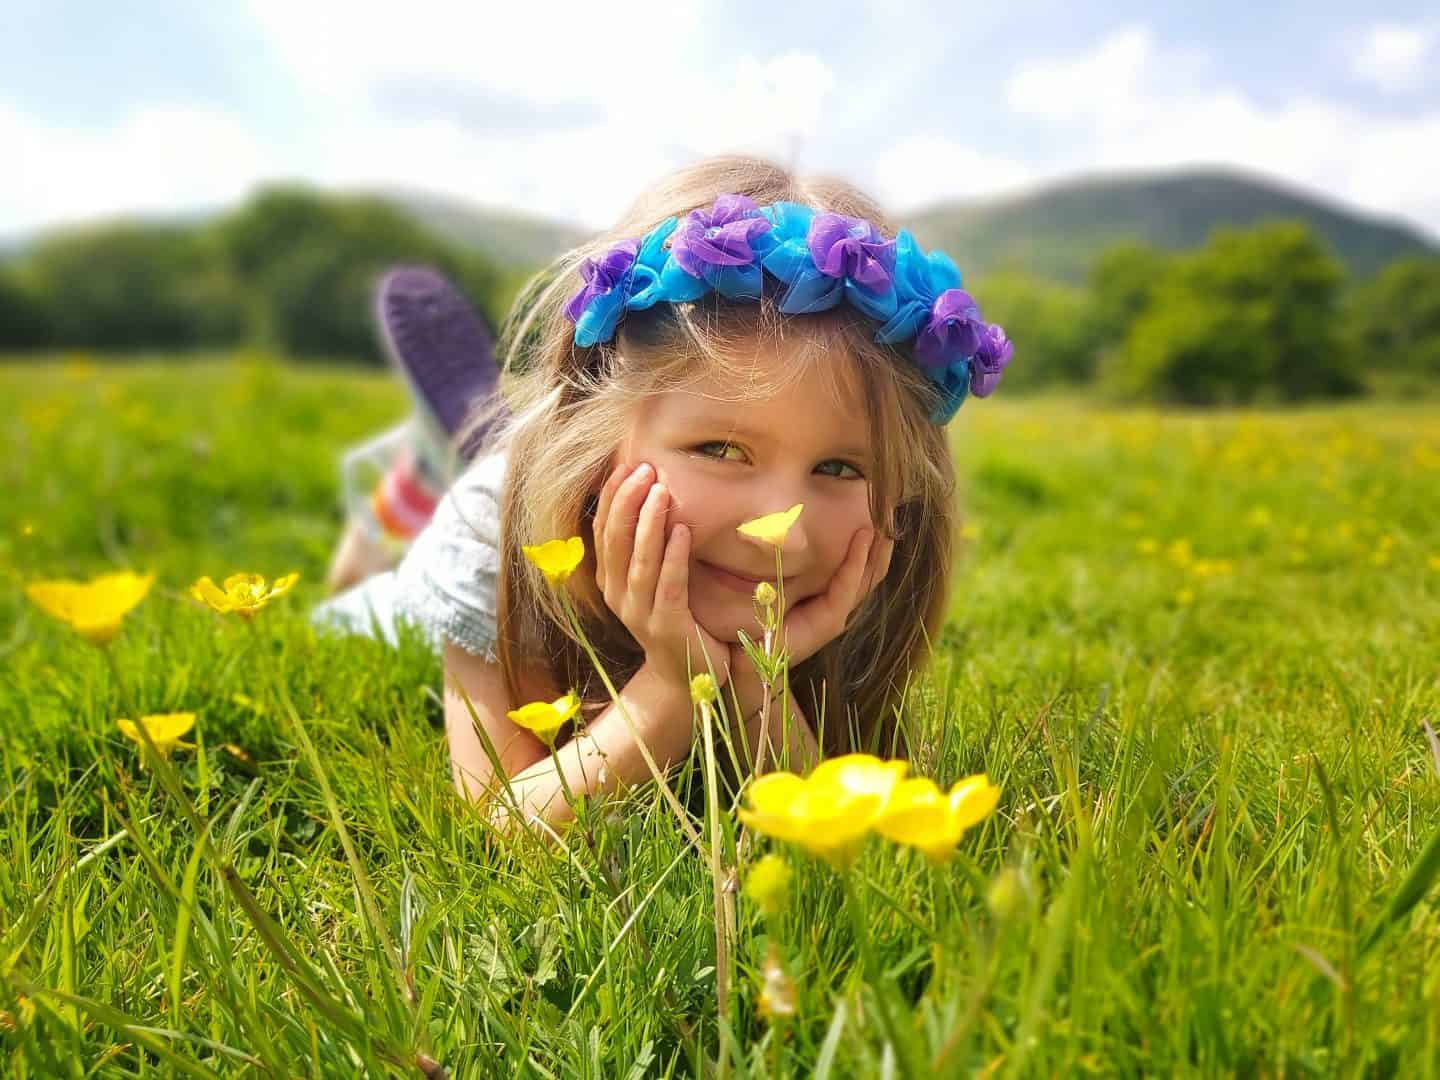 Little girl lying in a field with buttercups in foreground and hills behind